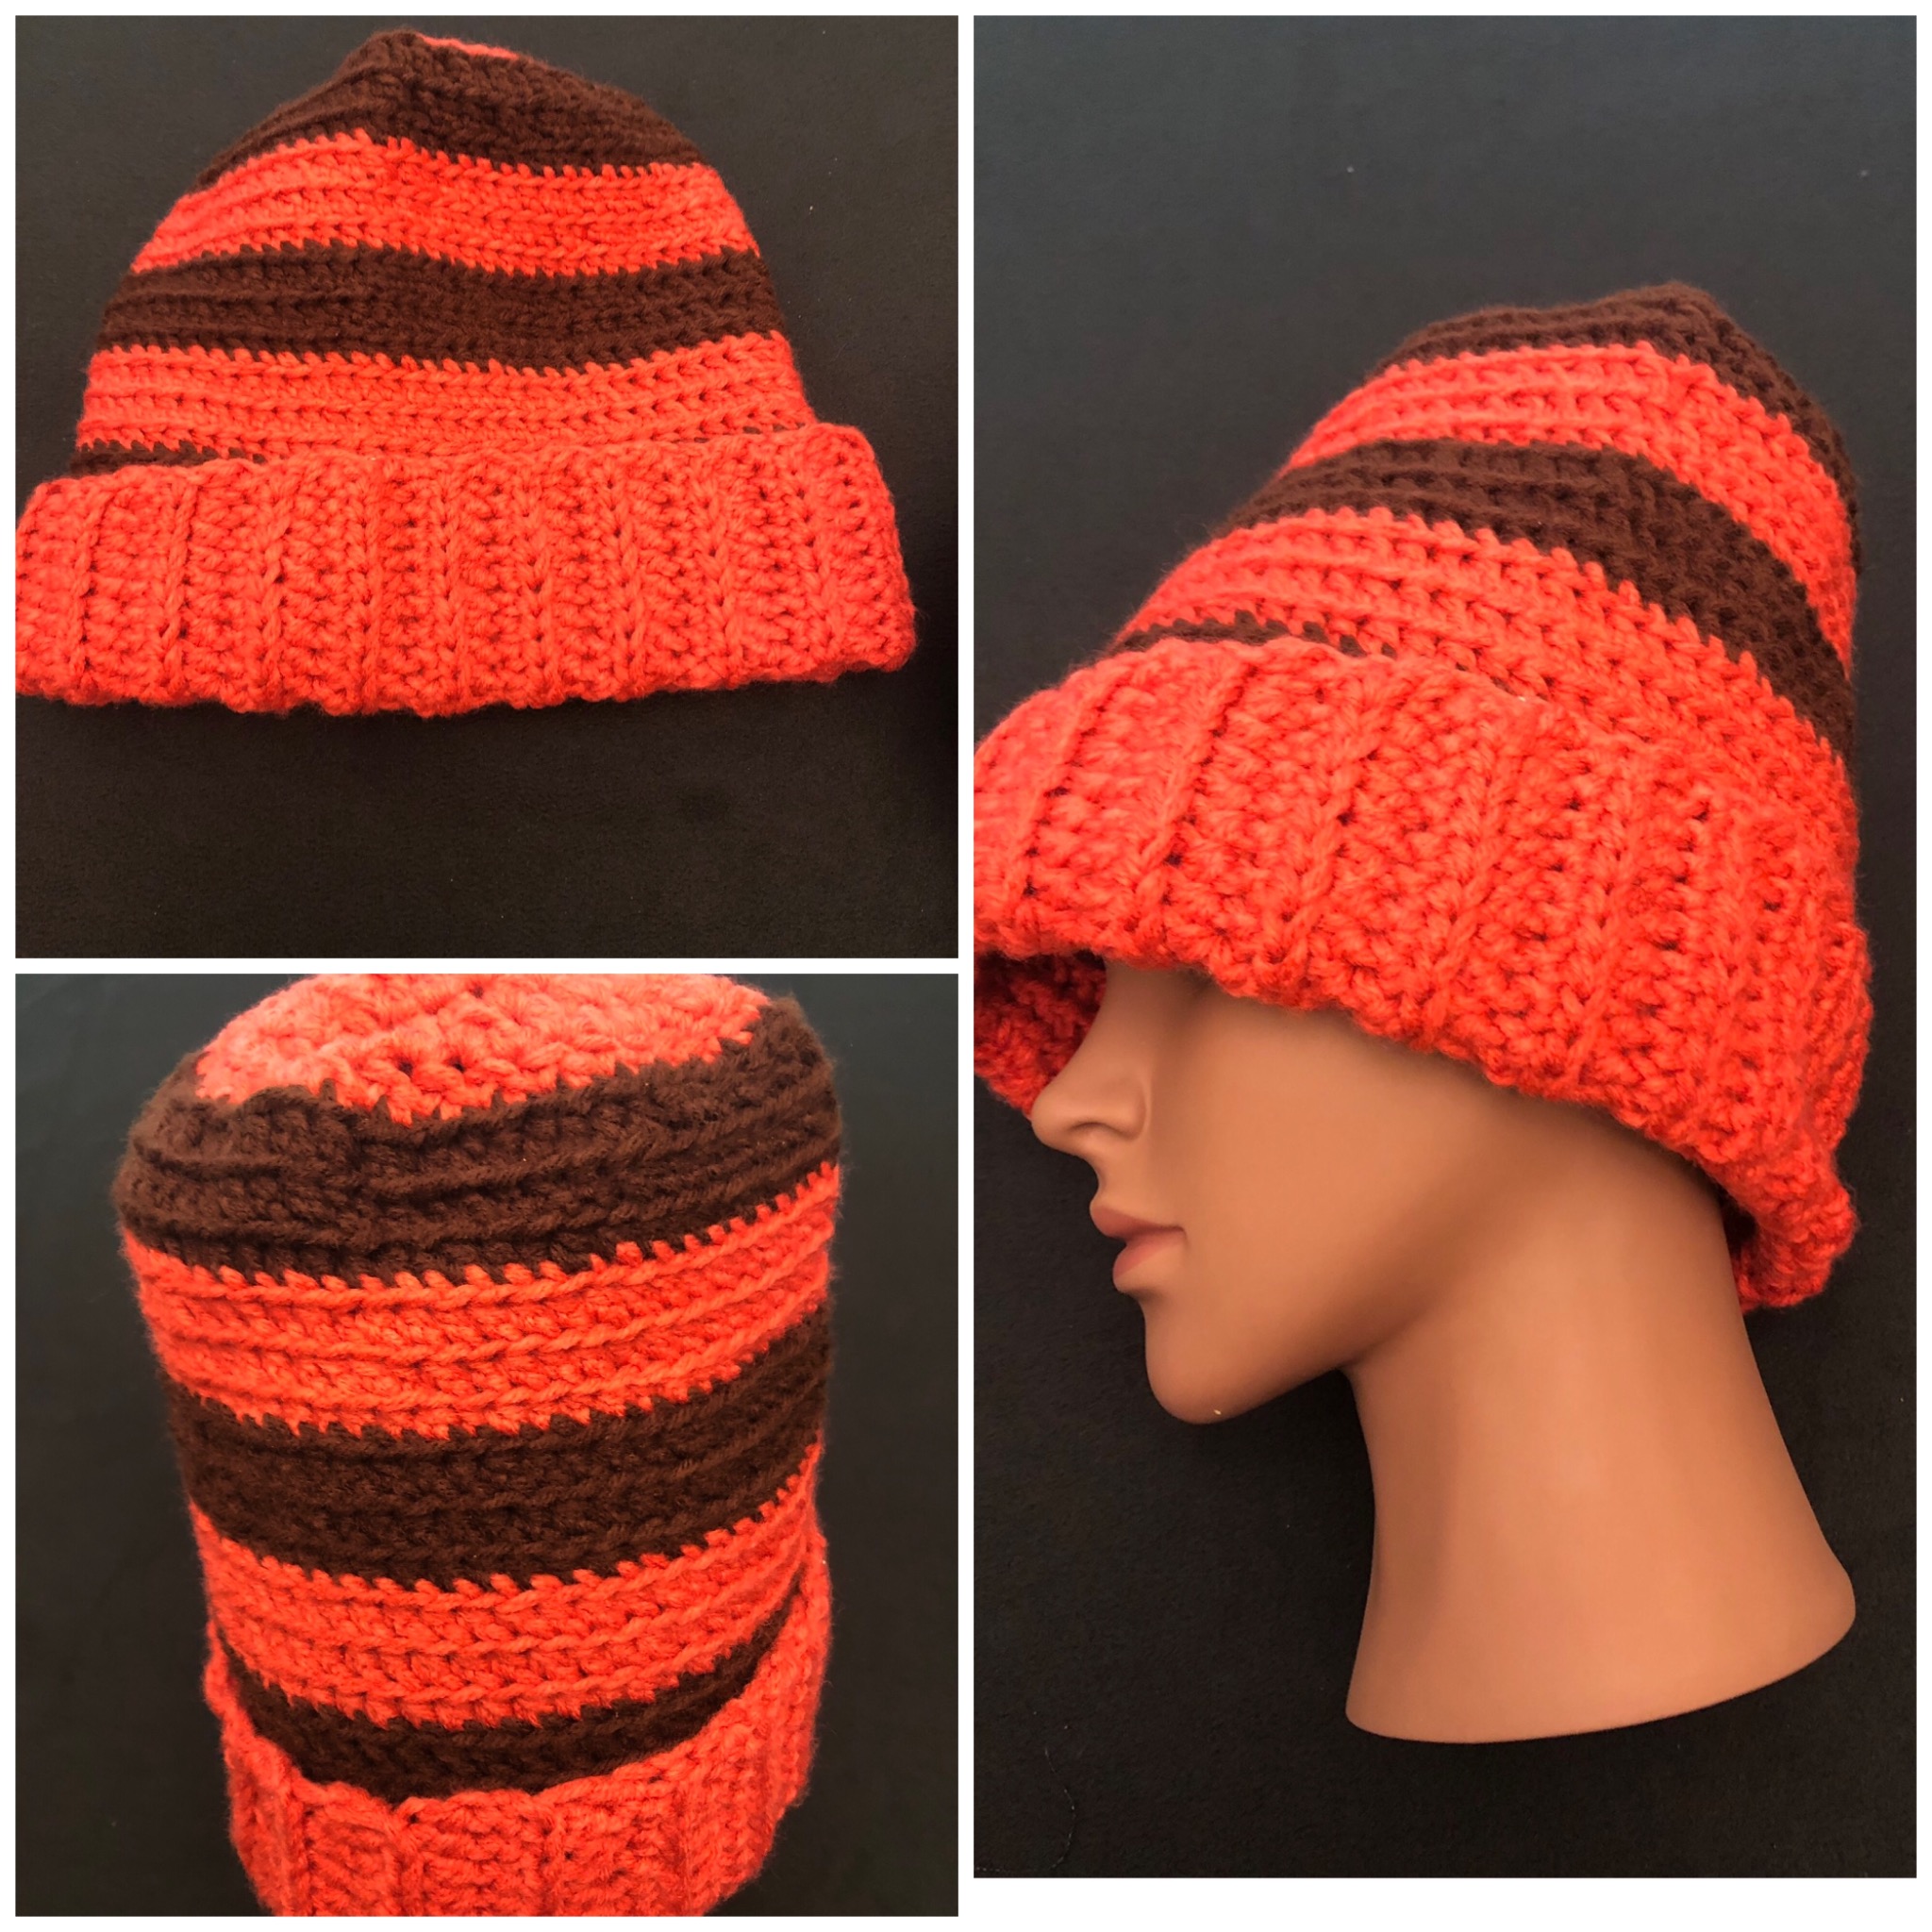 F. Cleveland Browns slouchy beanie 